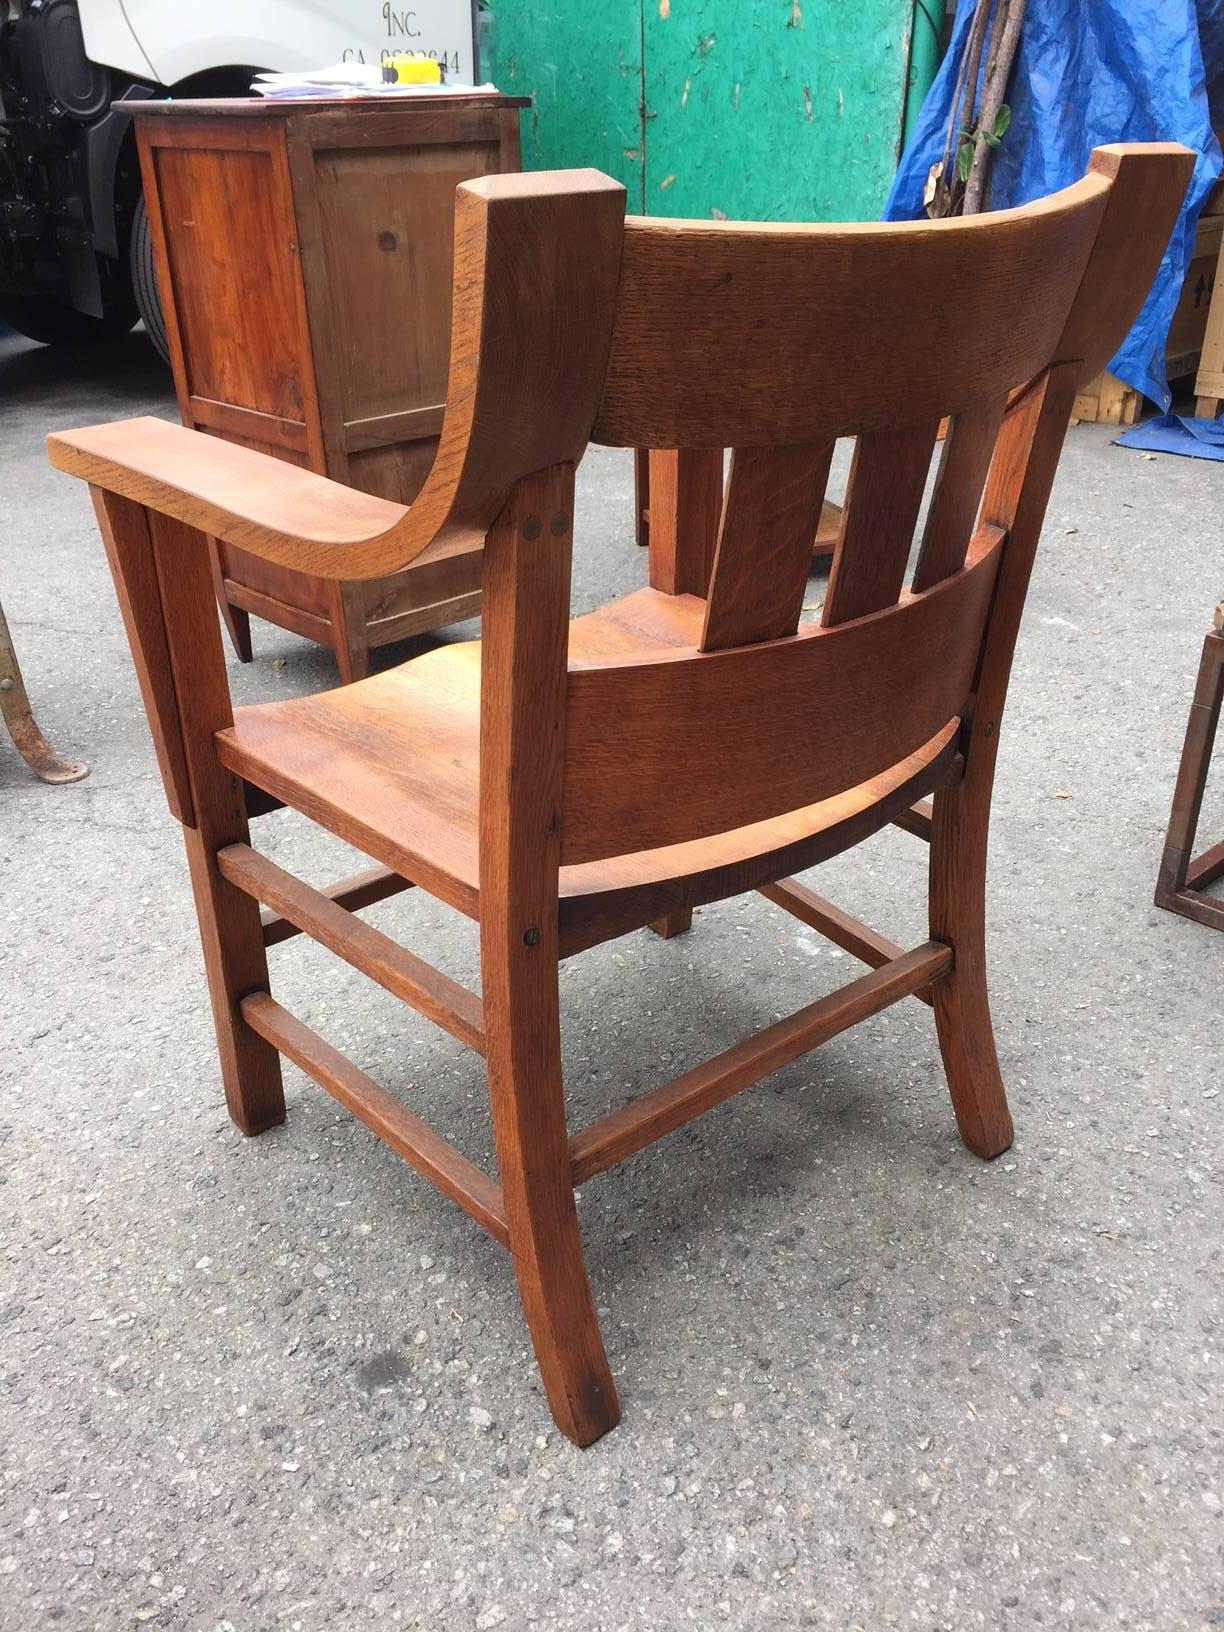 Early 20th Century Pair of Stickley Chairs, American, circa 1900